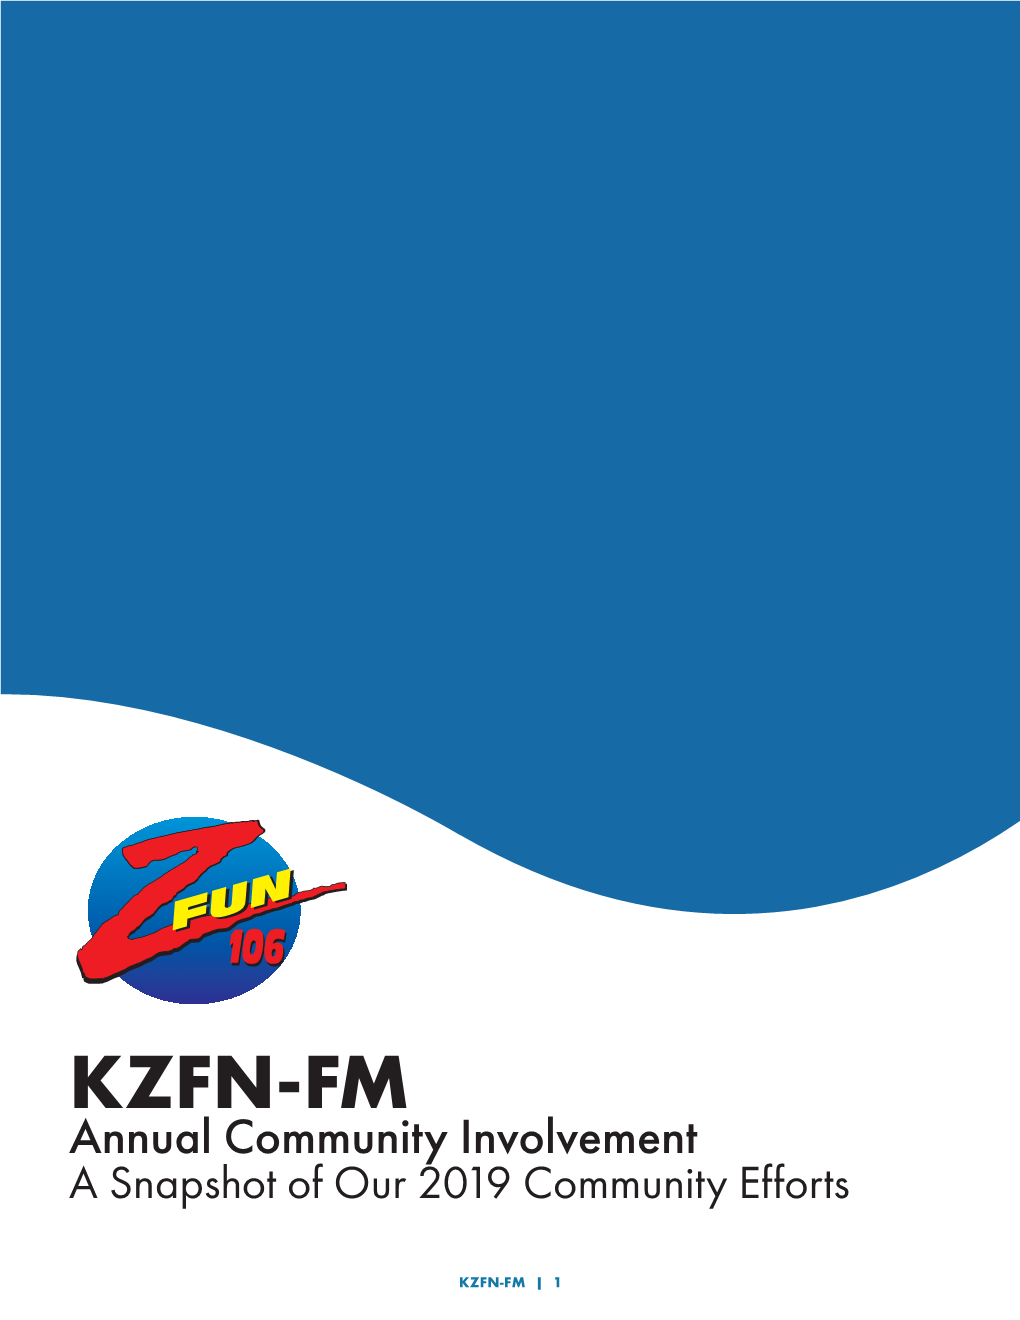 KZFN-FM Annual Community Involvement a Snapshot of Our 2019 Community Efforts